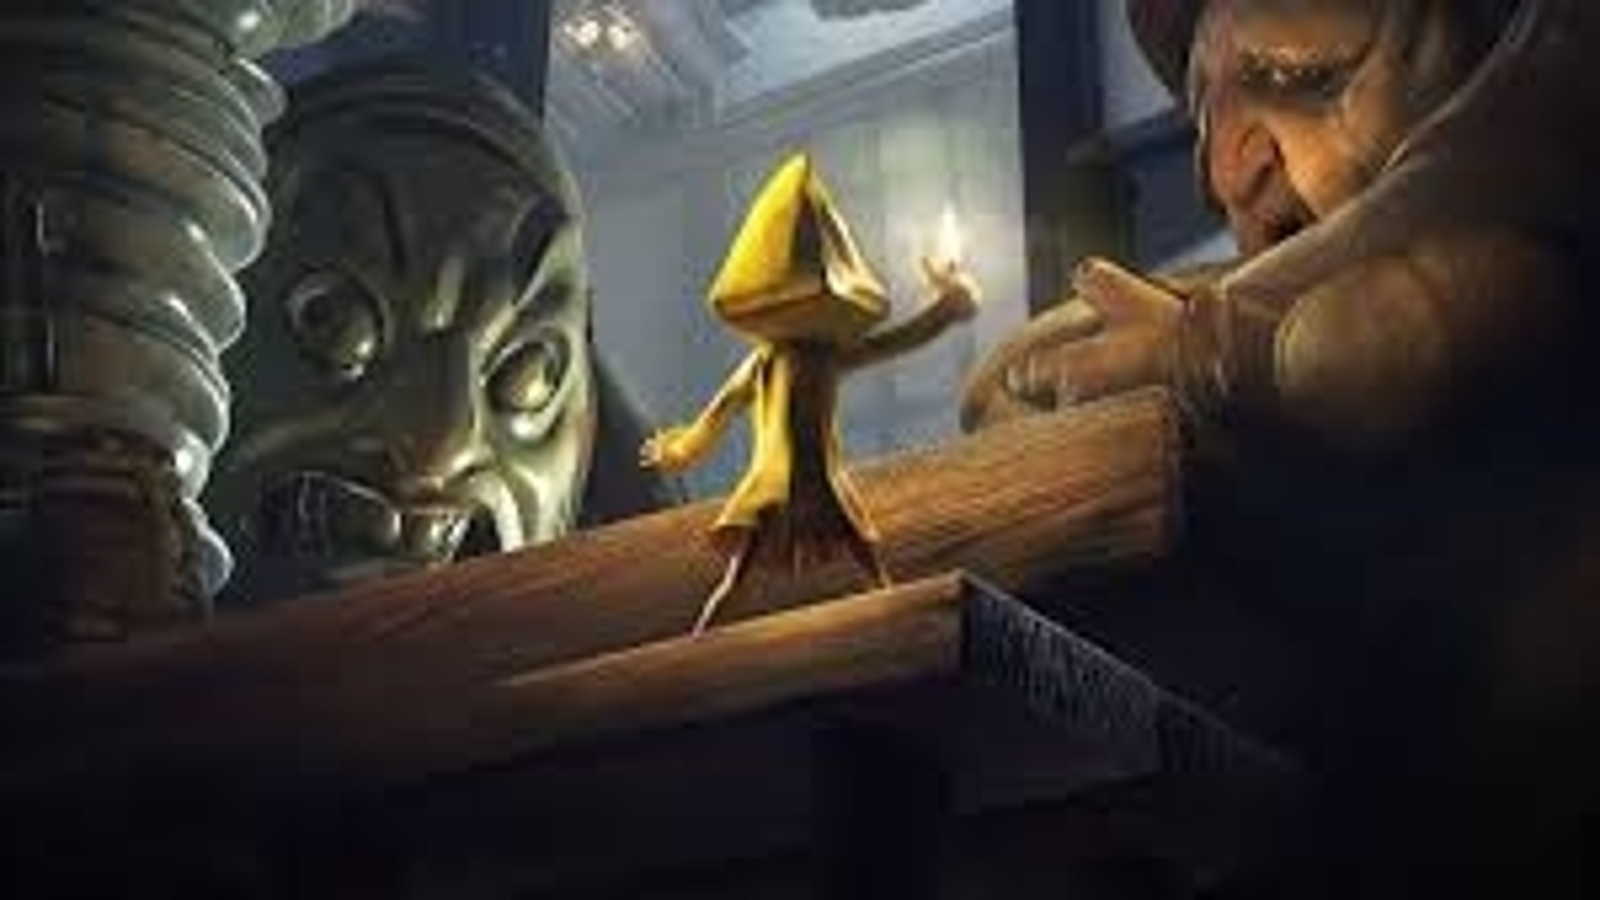 Jogo Little Nightmares (complete Edition) - Ps4 